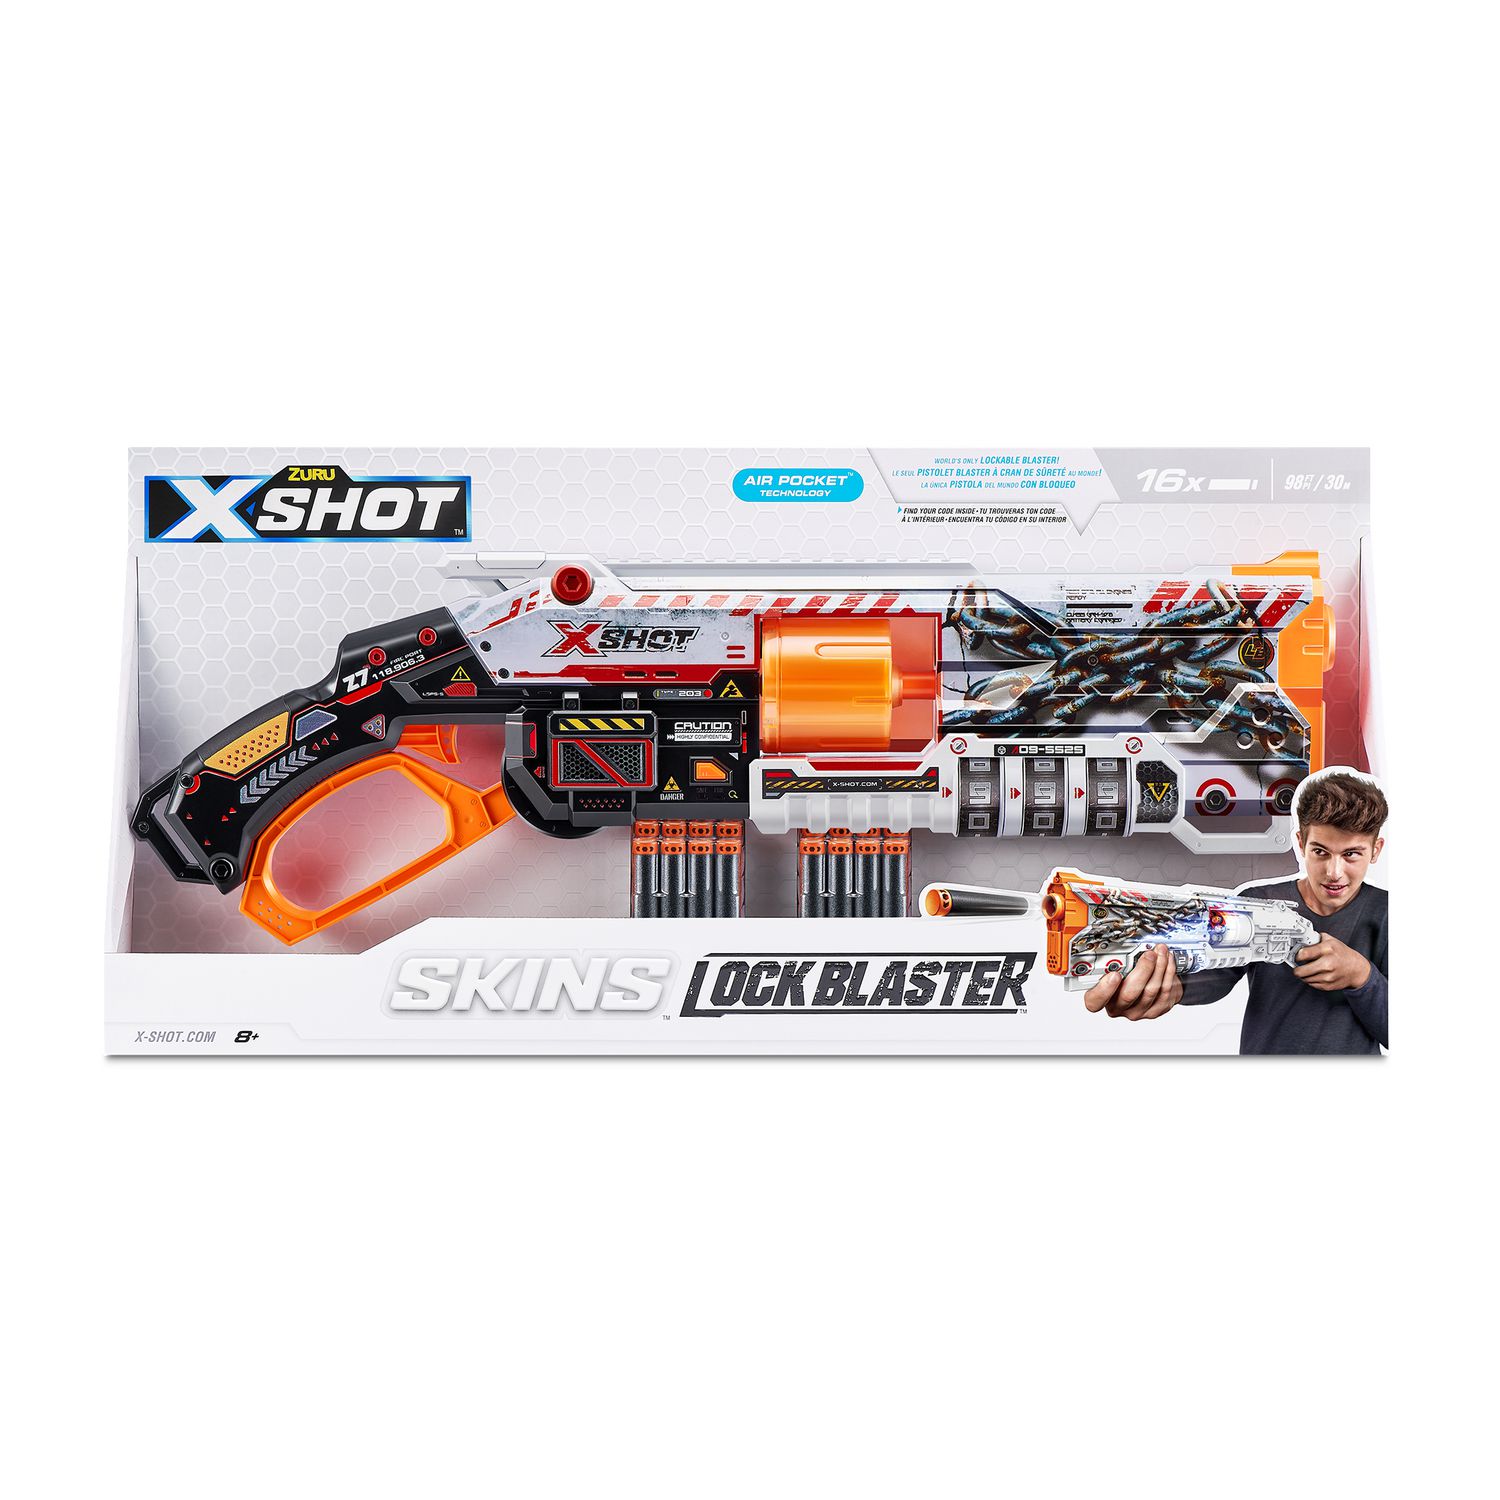 Honest Review: The XShot Trace Fire (XSHOT IS GOING GEL?!?) 